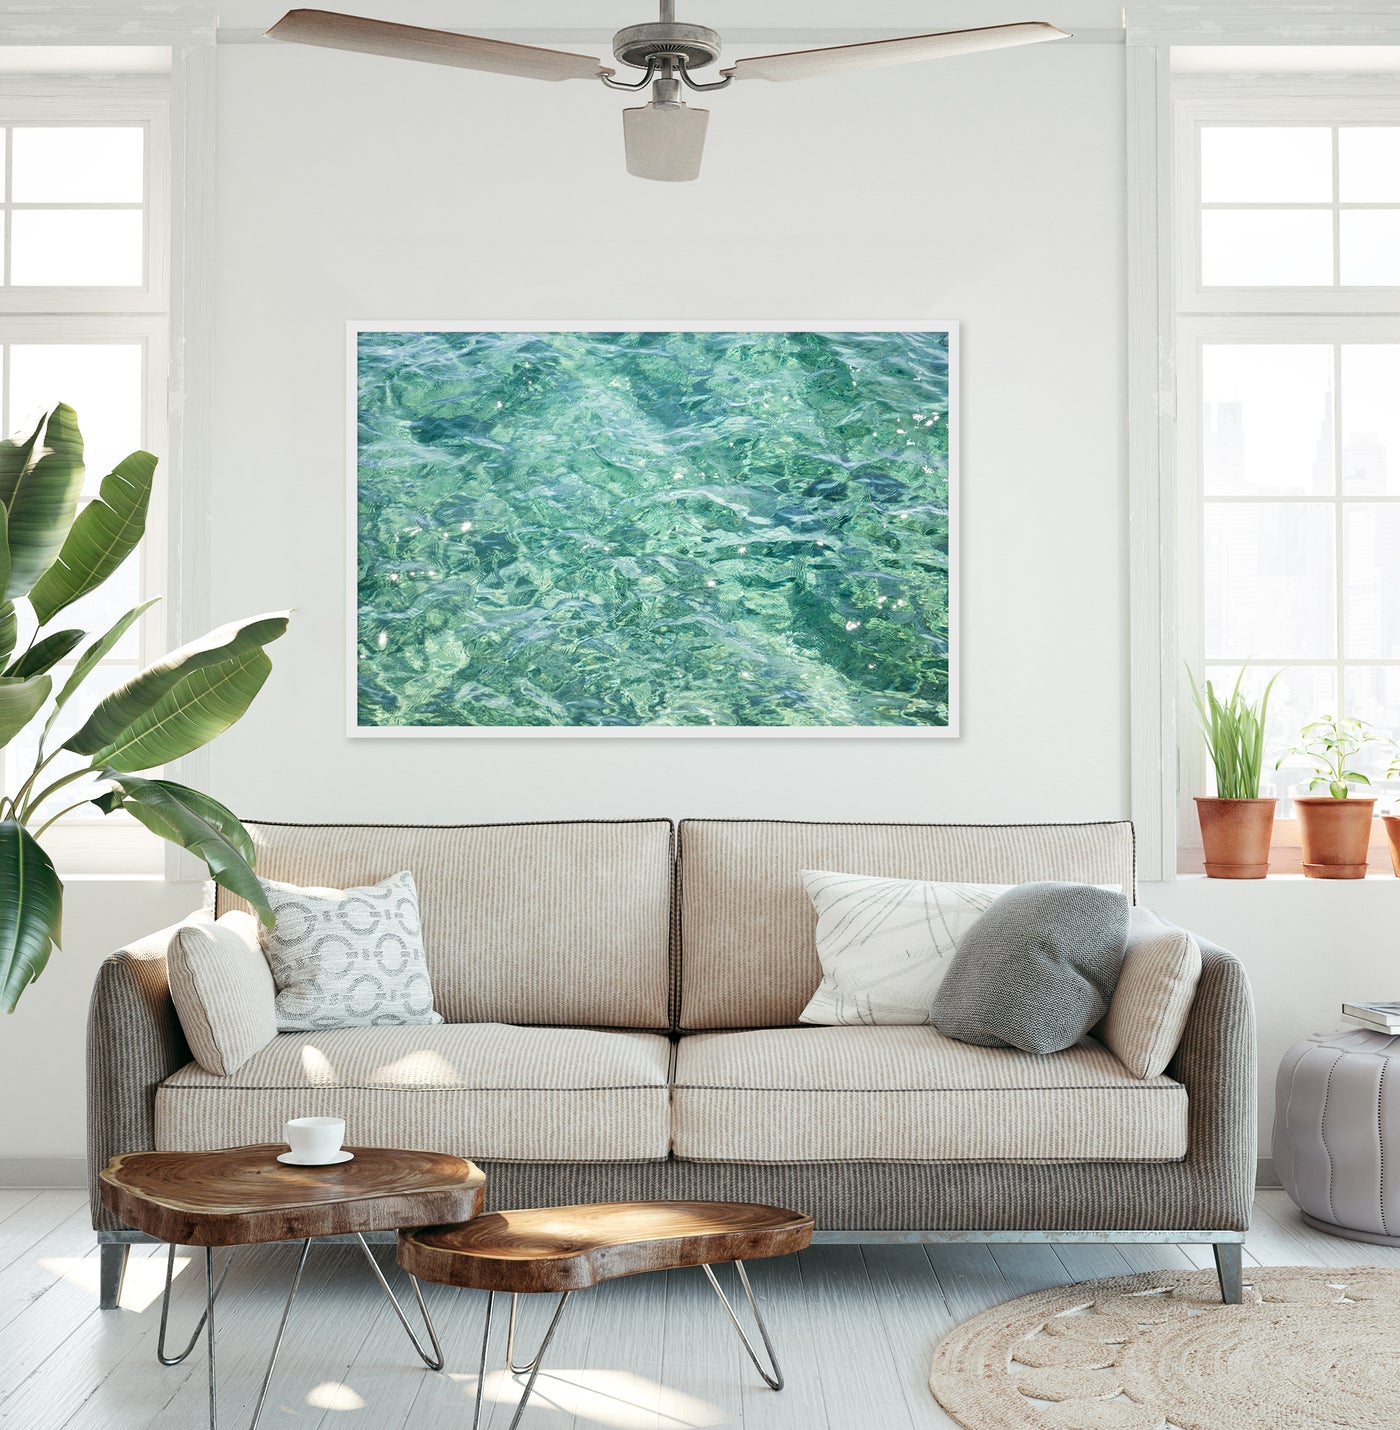 Large framed water abstract art print above couch in modern beach house living room